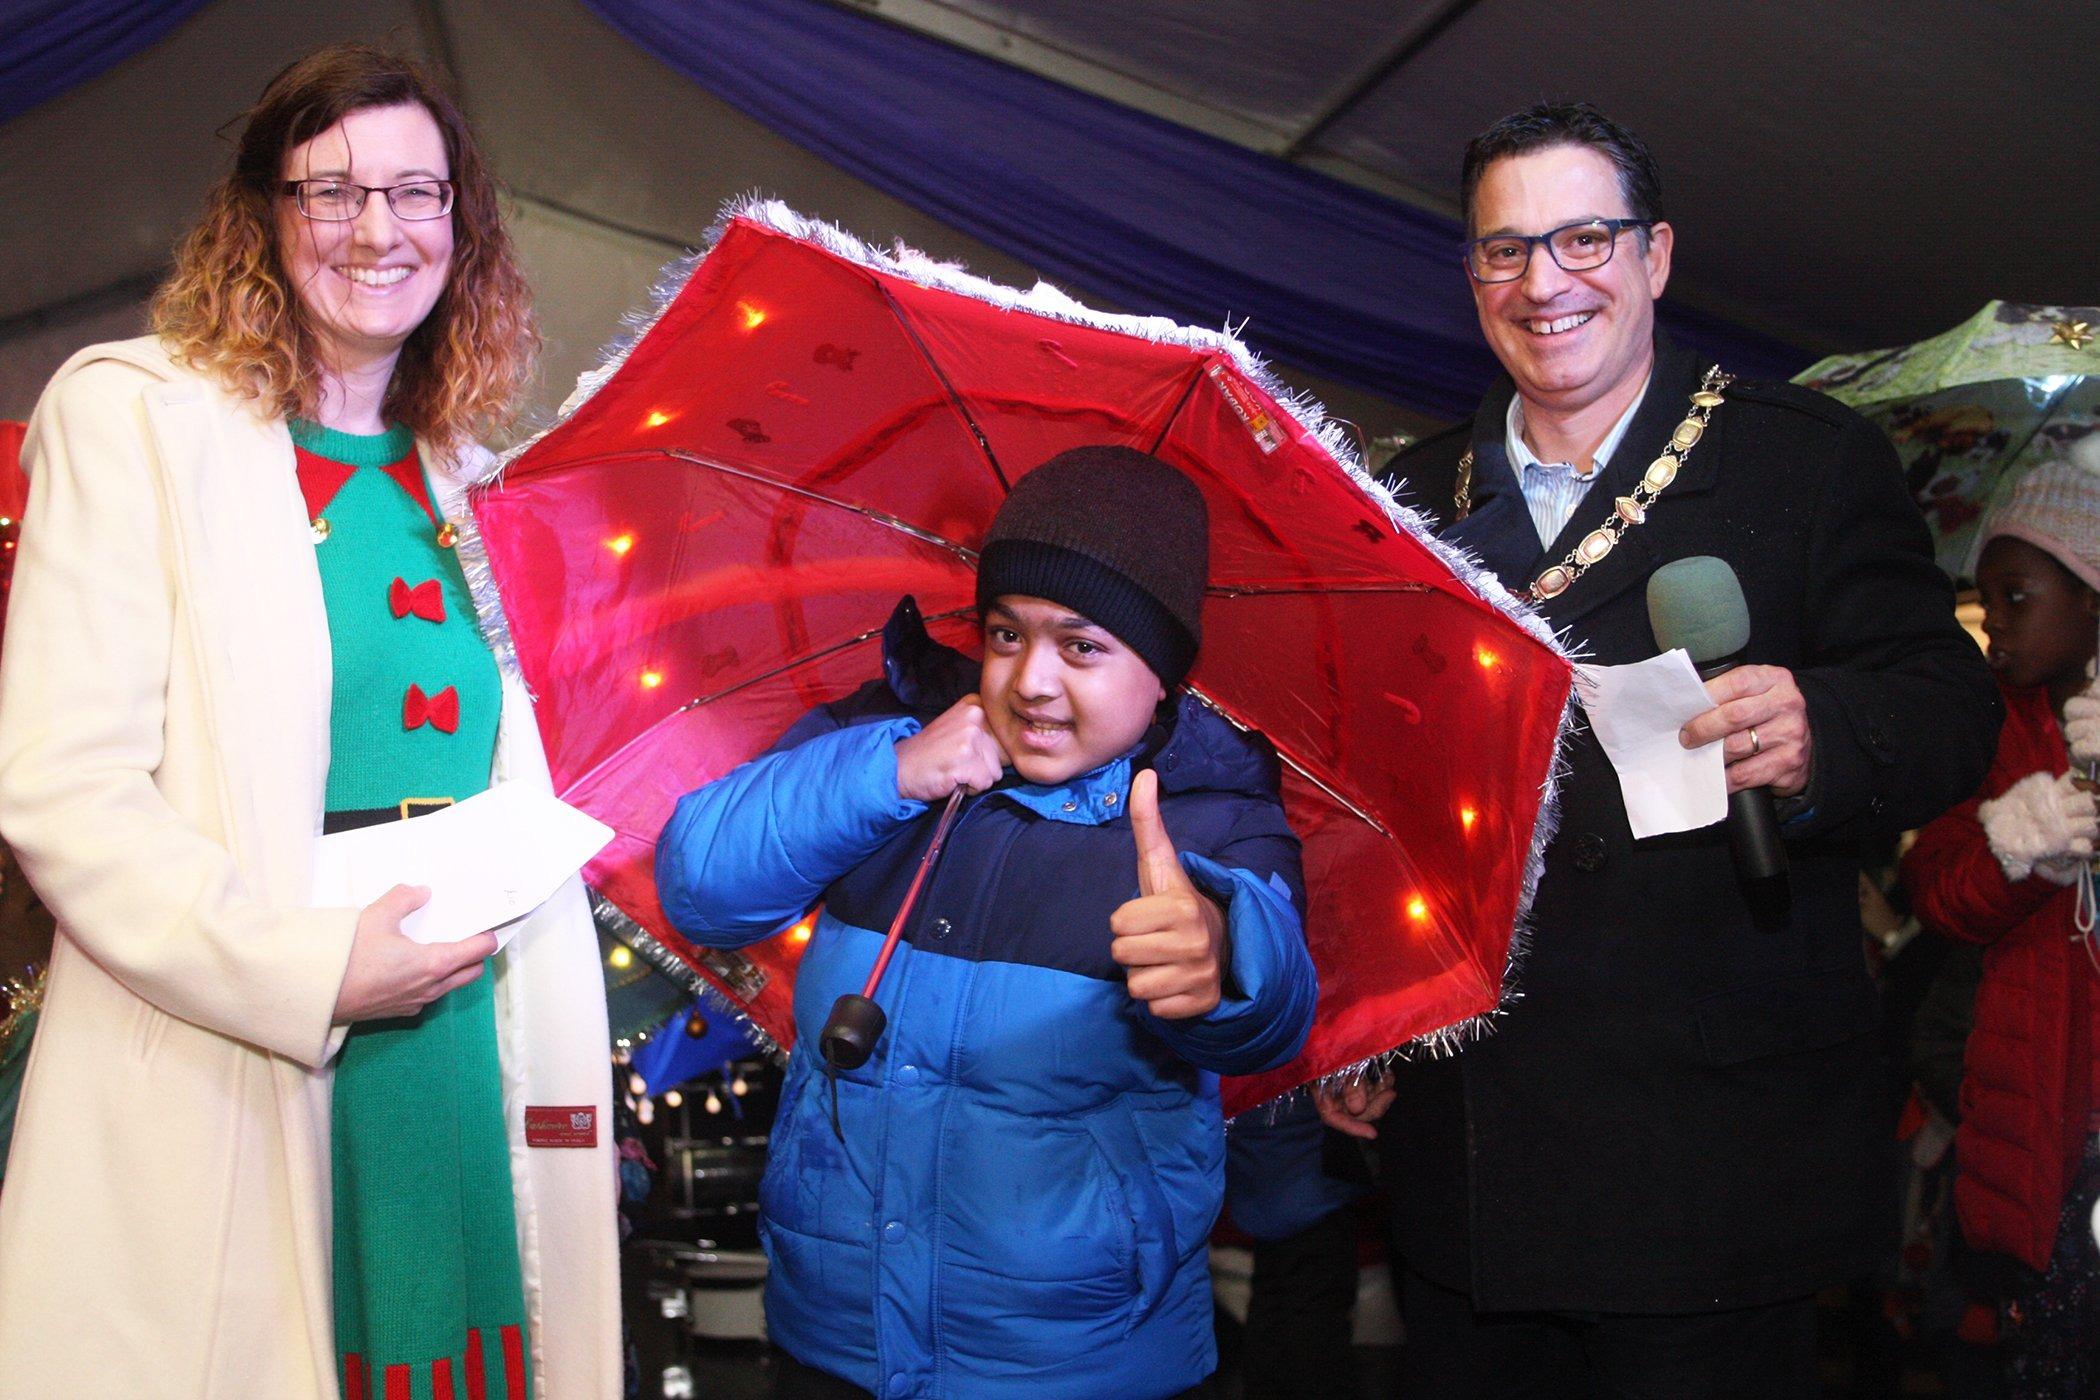 DM19112420a.jpg. Haywards Heath Christmas Lights. Illuminated umbrella competition winner Abhinav Raman with Gina Stainer from the Mid Sussex Times and the mayor Cllr Alastair McPherson. Photo by Derek Martin Photography. SUS-191123-215652008